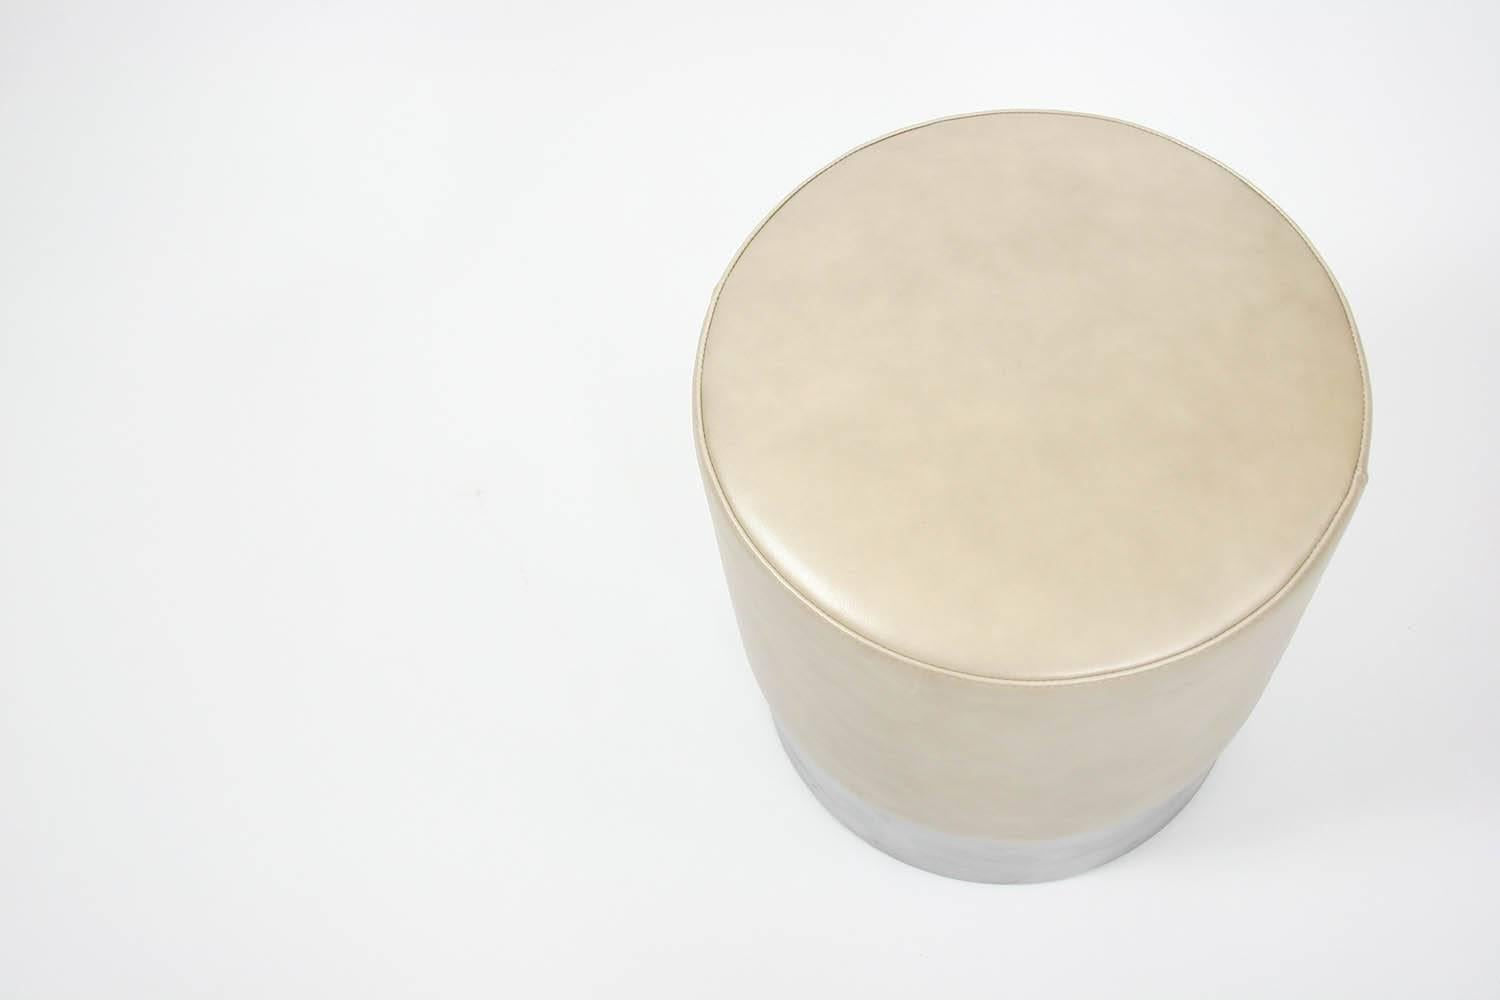 Luigi Caccia Dominioni leather and chrome stool for Azucena, Italy, circa 1970s in very condition with age appropriate wear and patina to base.

Dimensions: 15.75